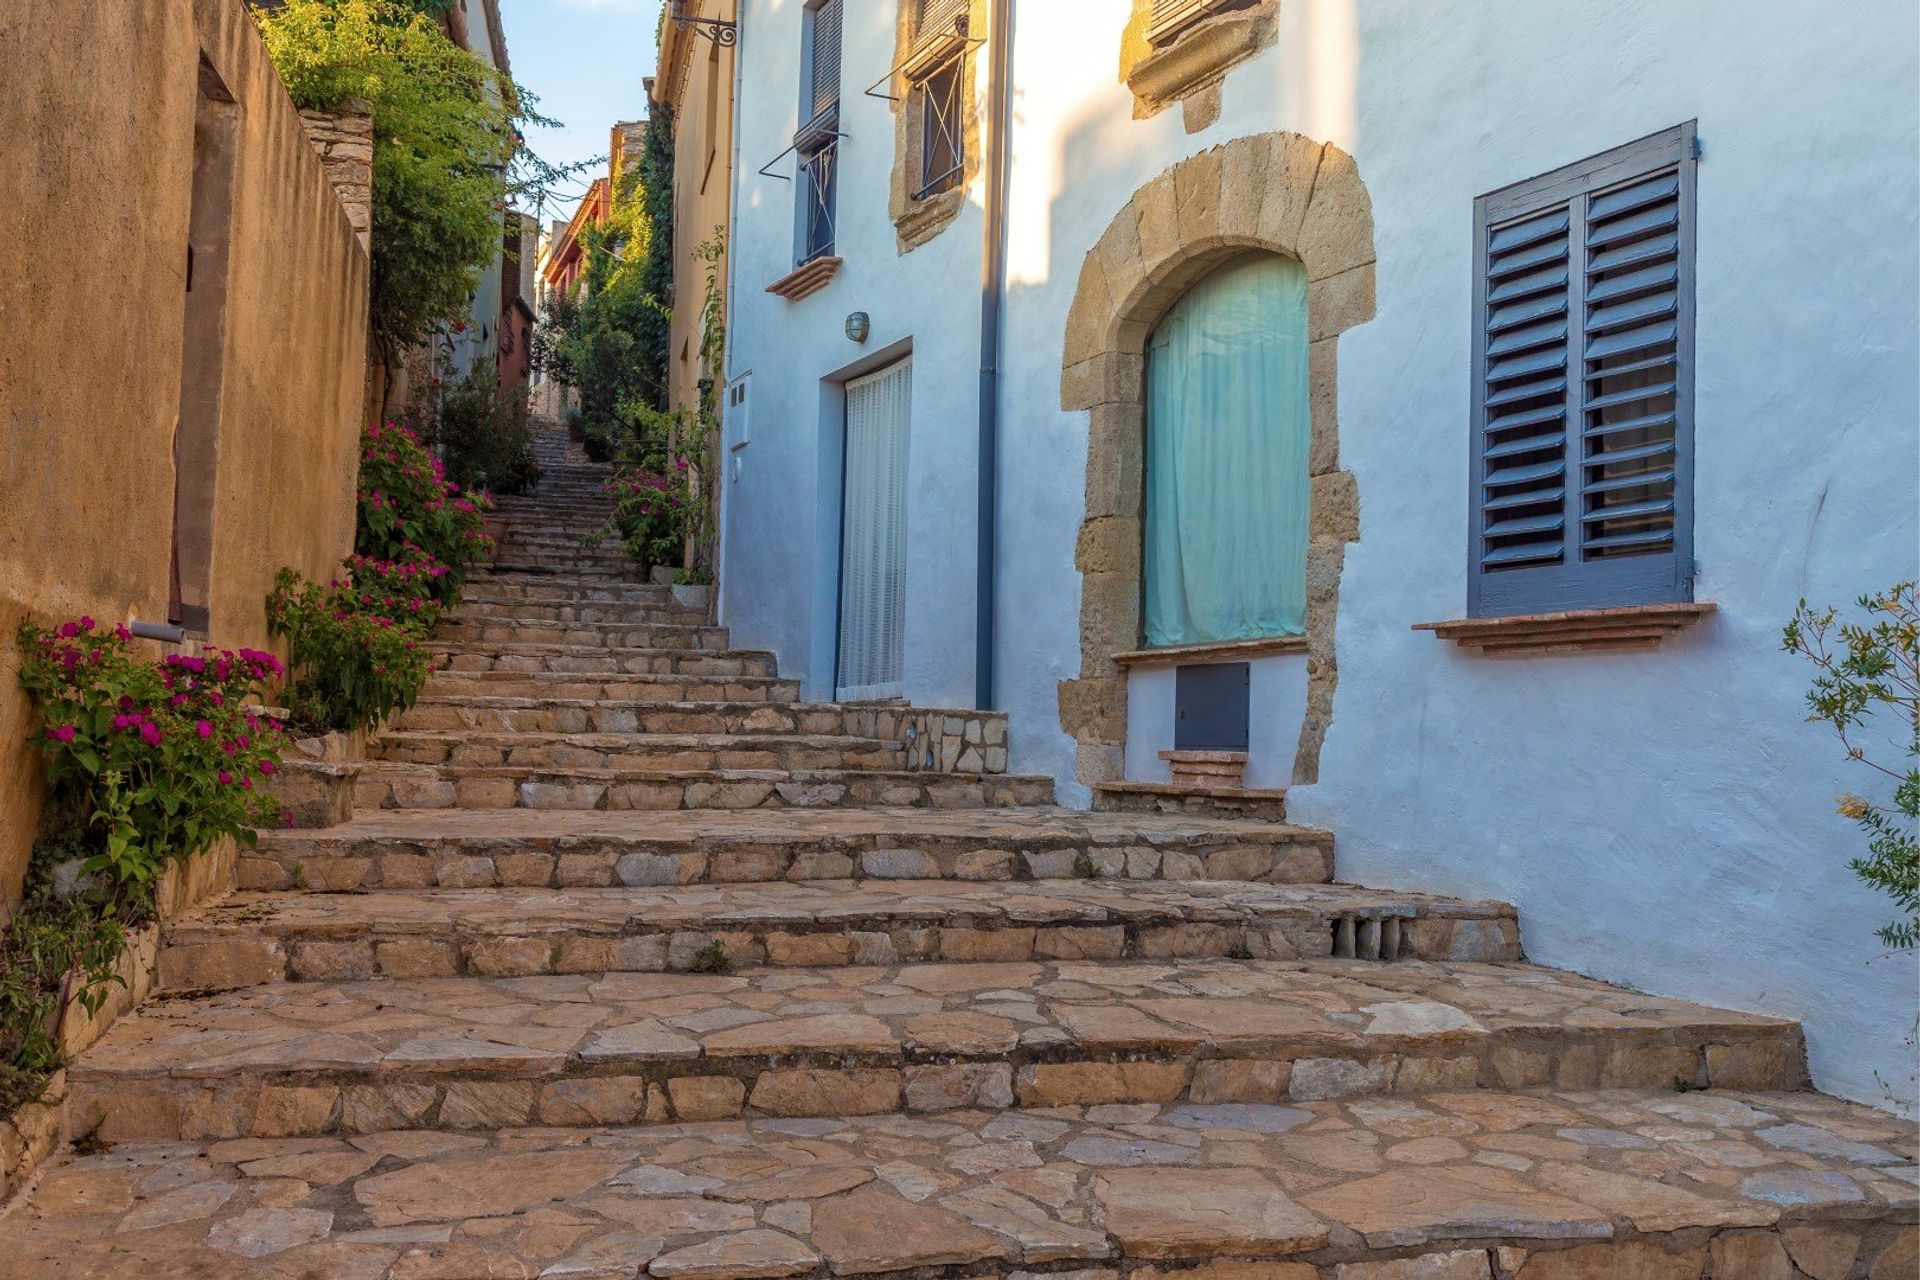 Begur boasts old town charm, seen in the cobbled, flower-lined side streets and painted houses